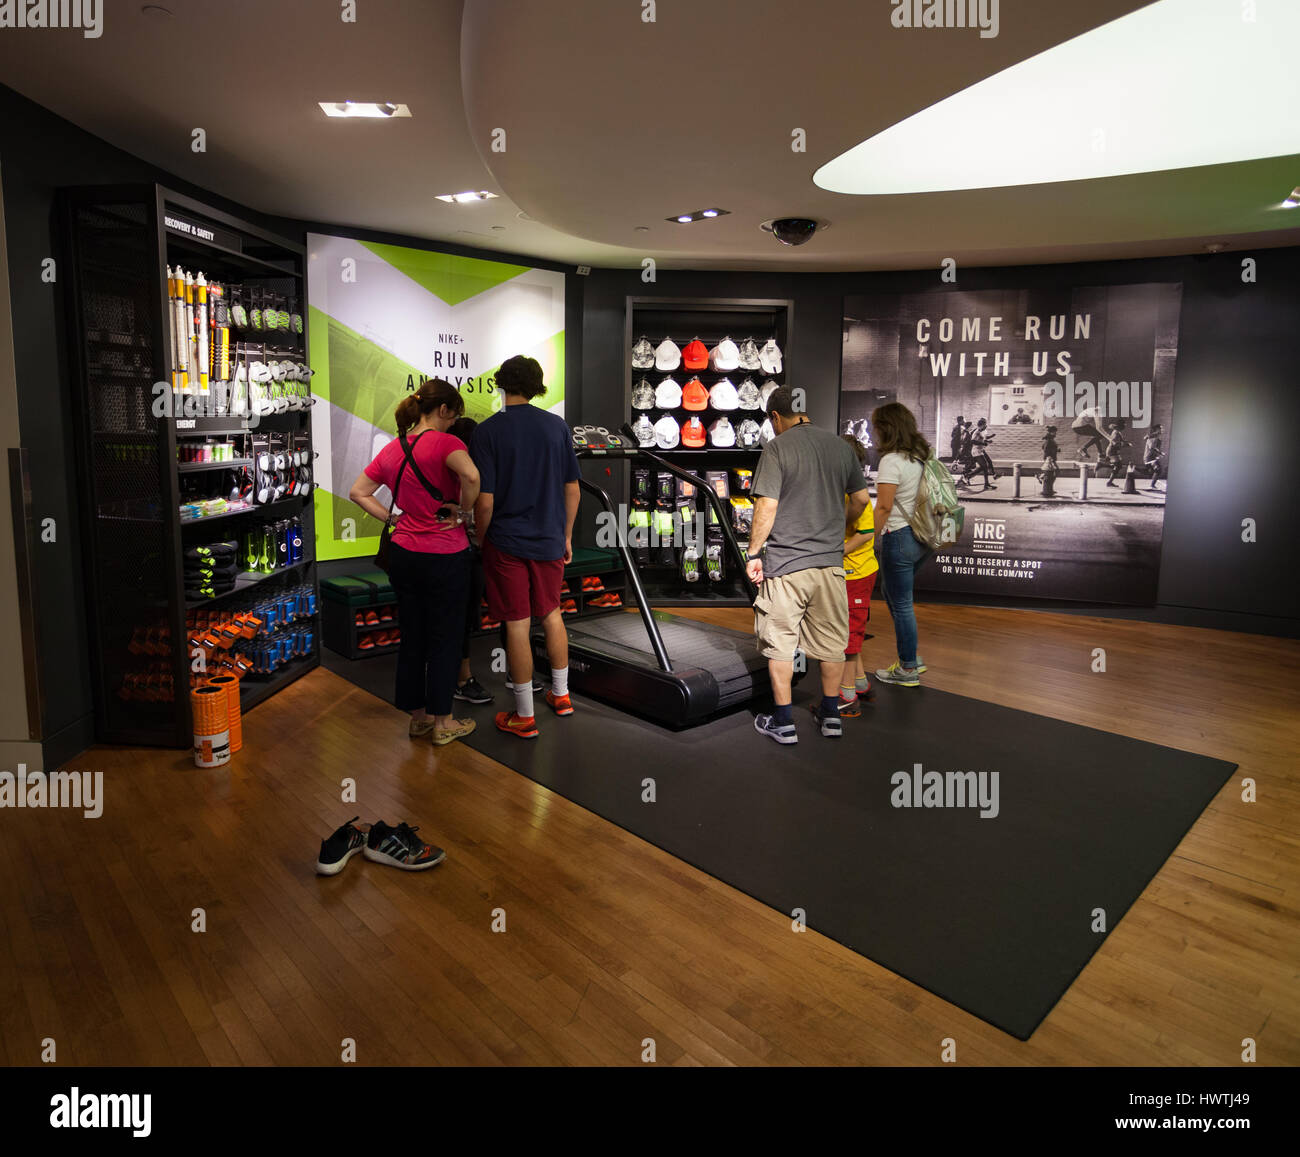 Nike Store New York High Resolution Stock Photography and Images - Alamy